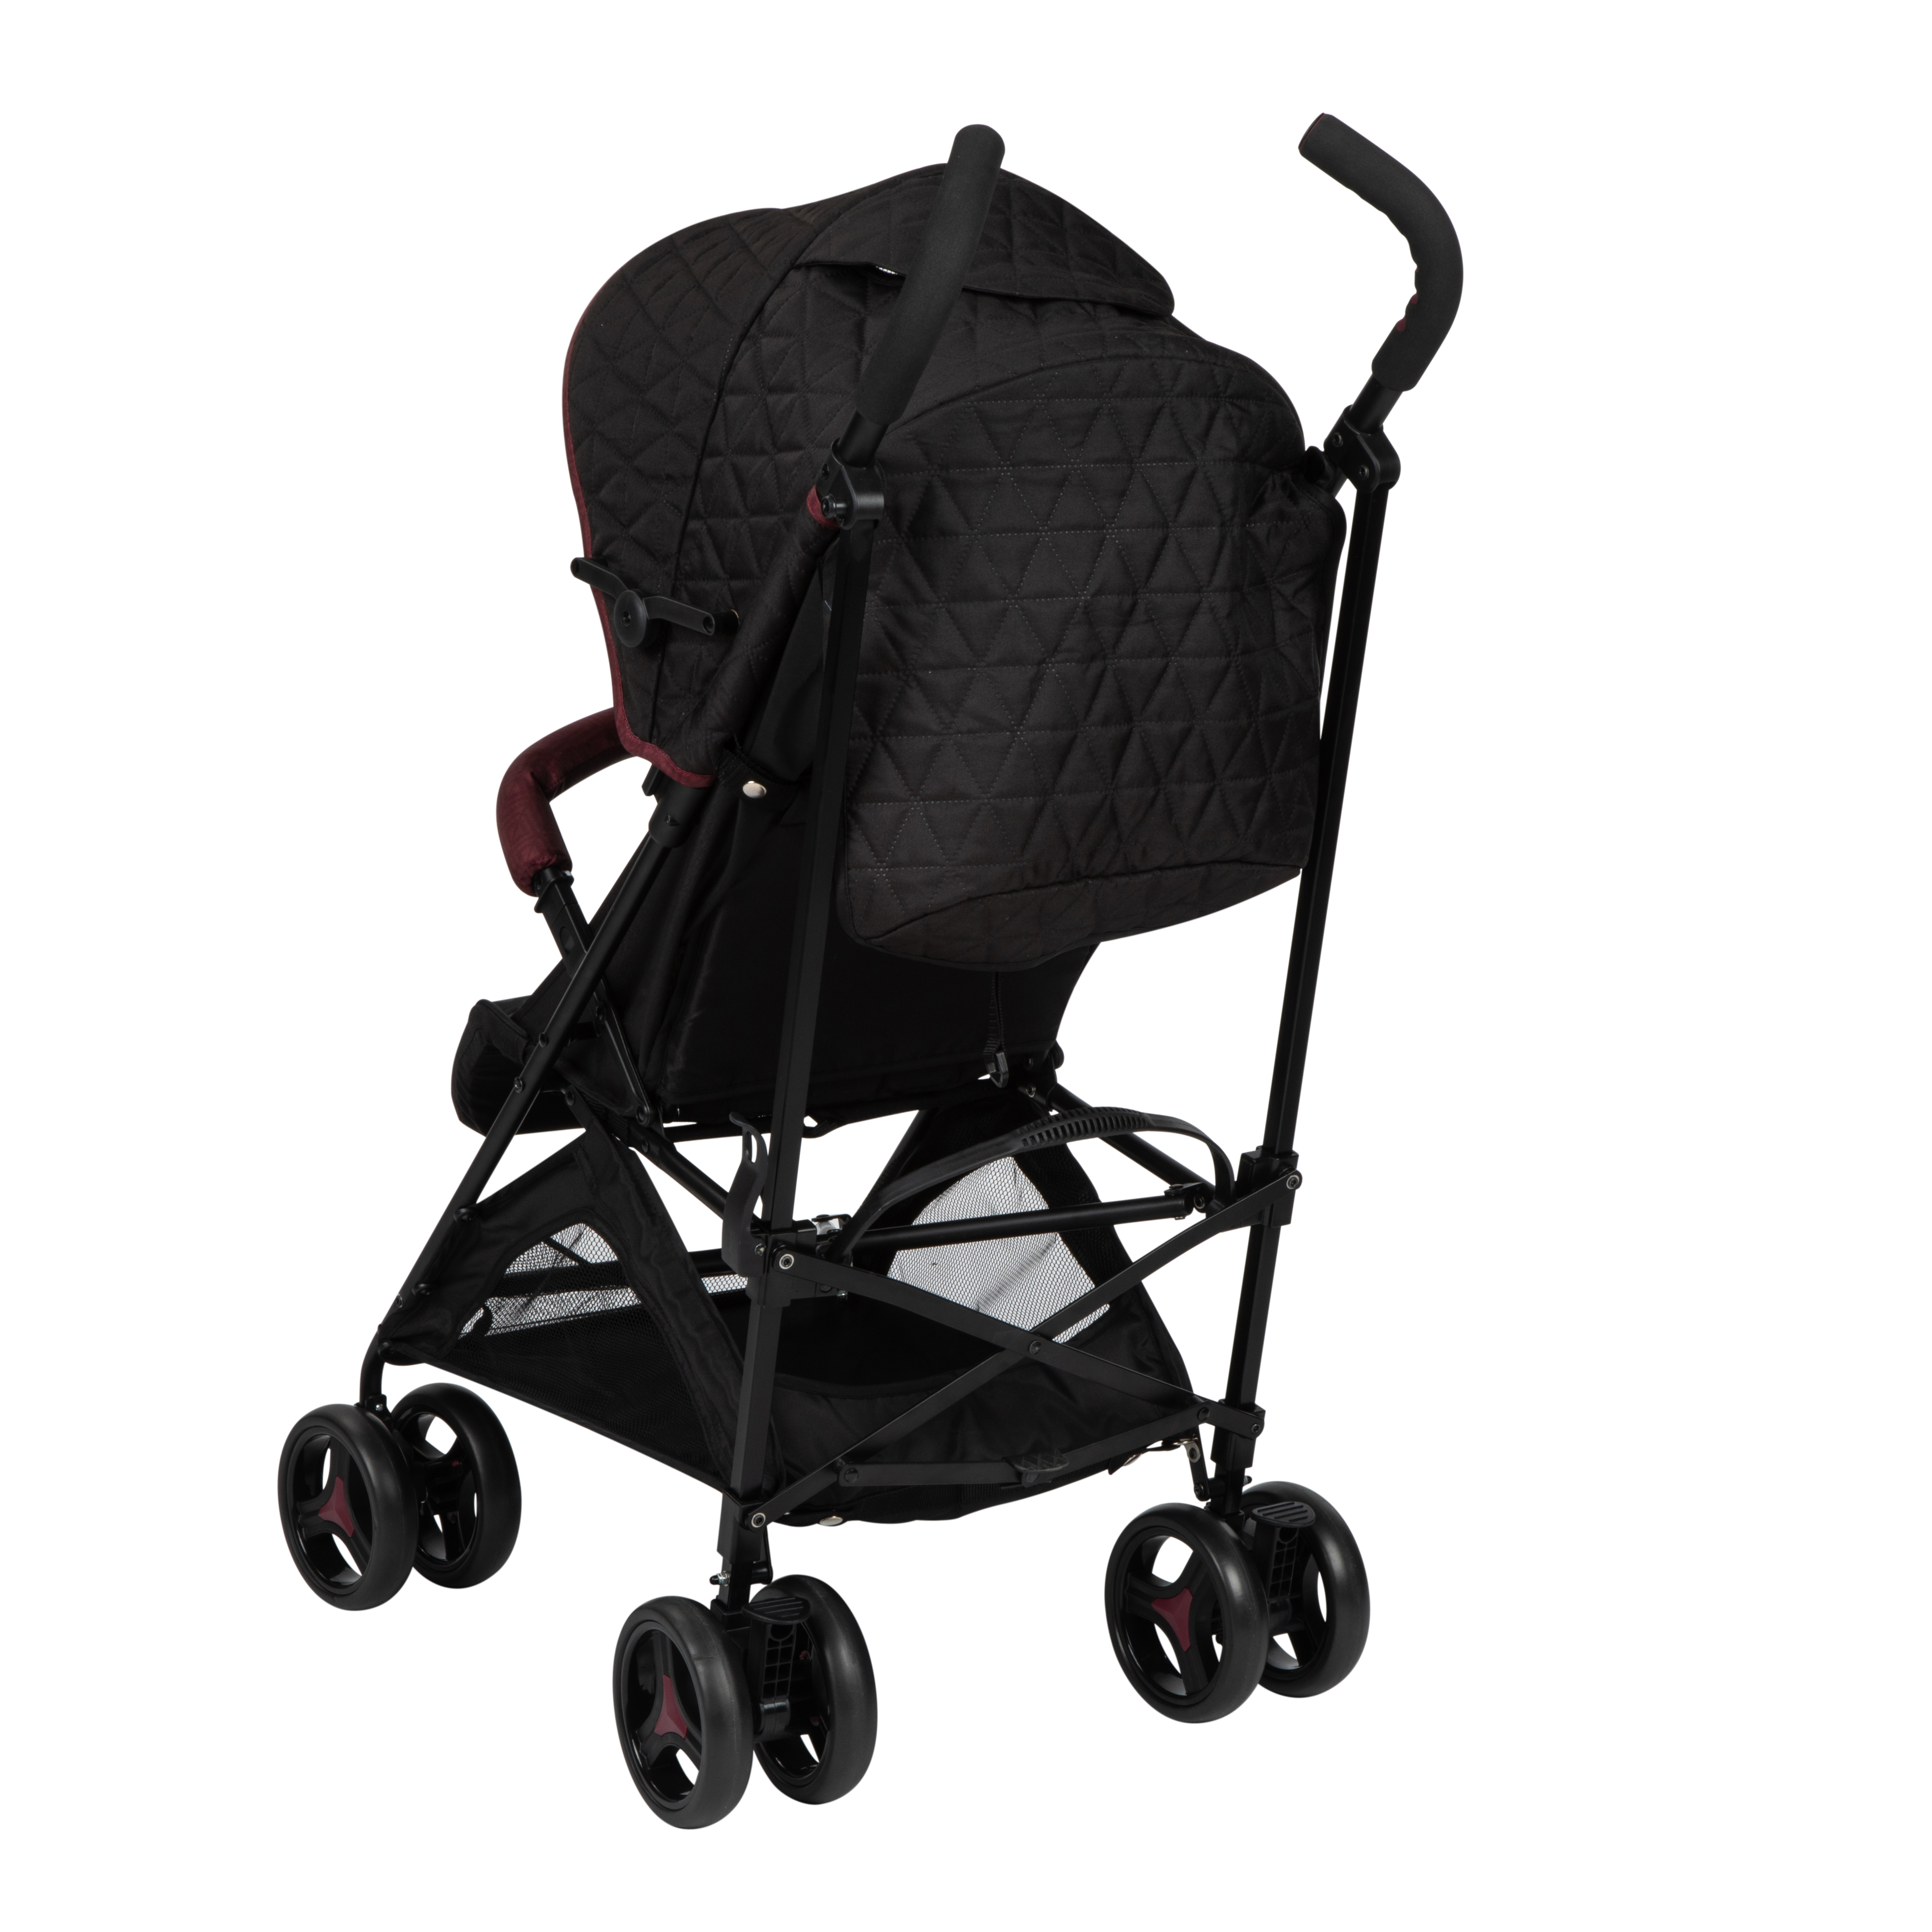 Monbebe Breeze Lightweight Compact Baby Stroller with Canopy & Basket (Great For Travel) $59 +Tax & Free Shipping